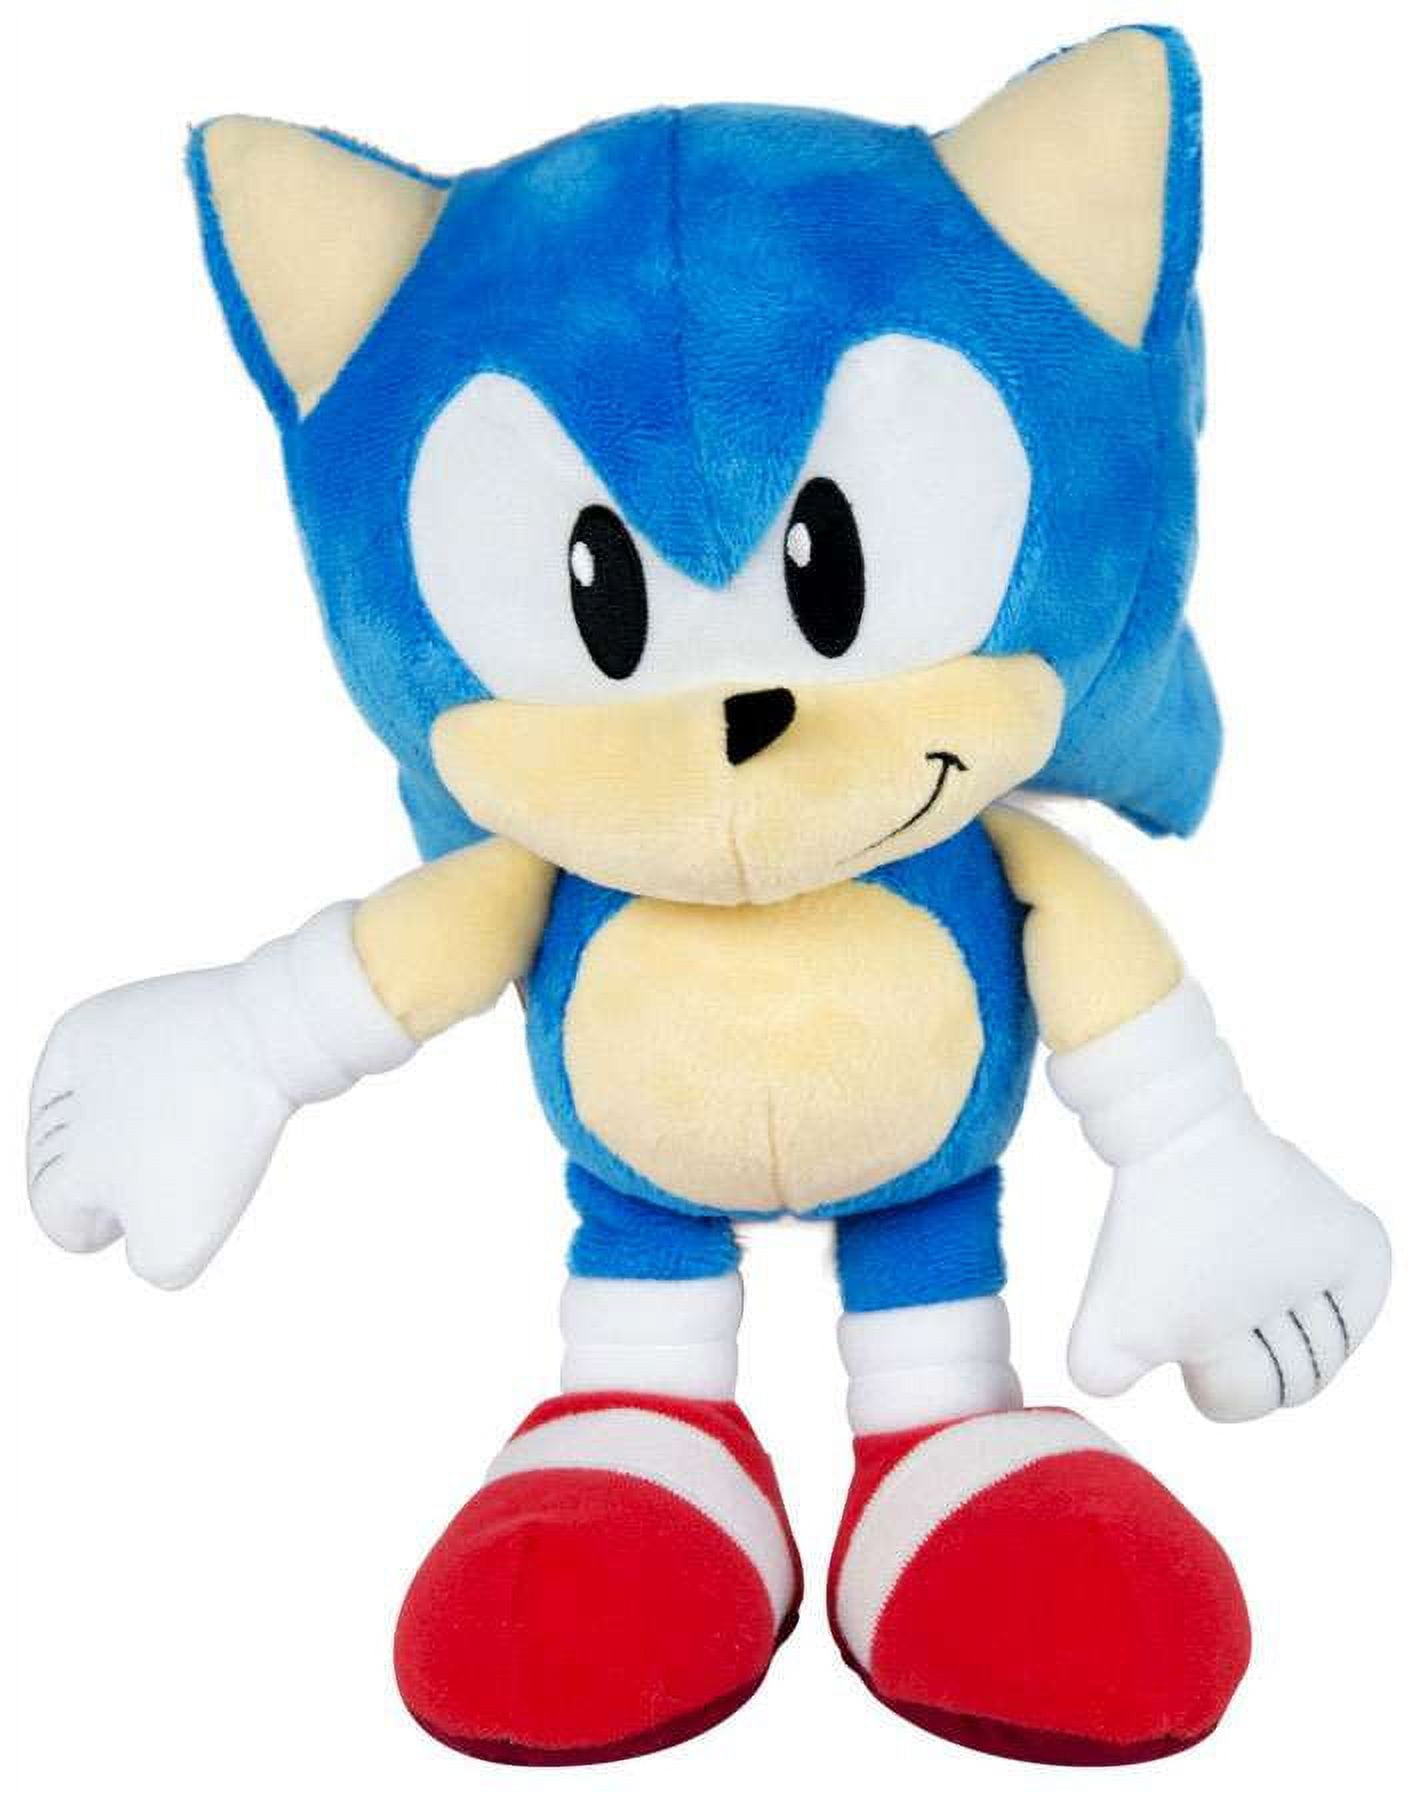 Best Buy: Sonic Classic Collection — PRE-OWNED